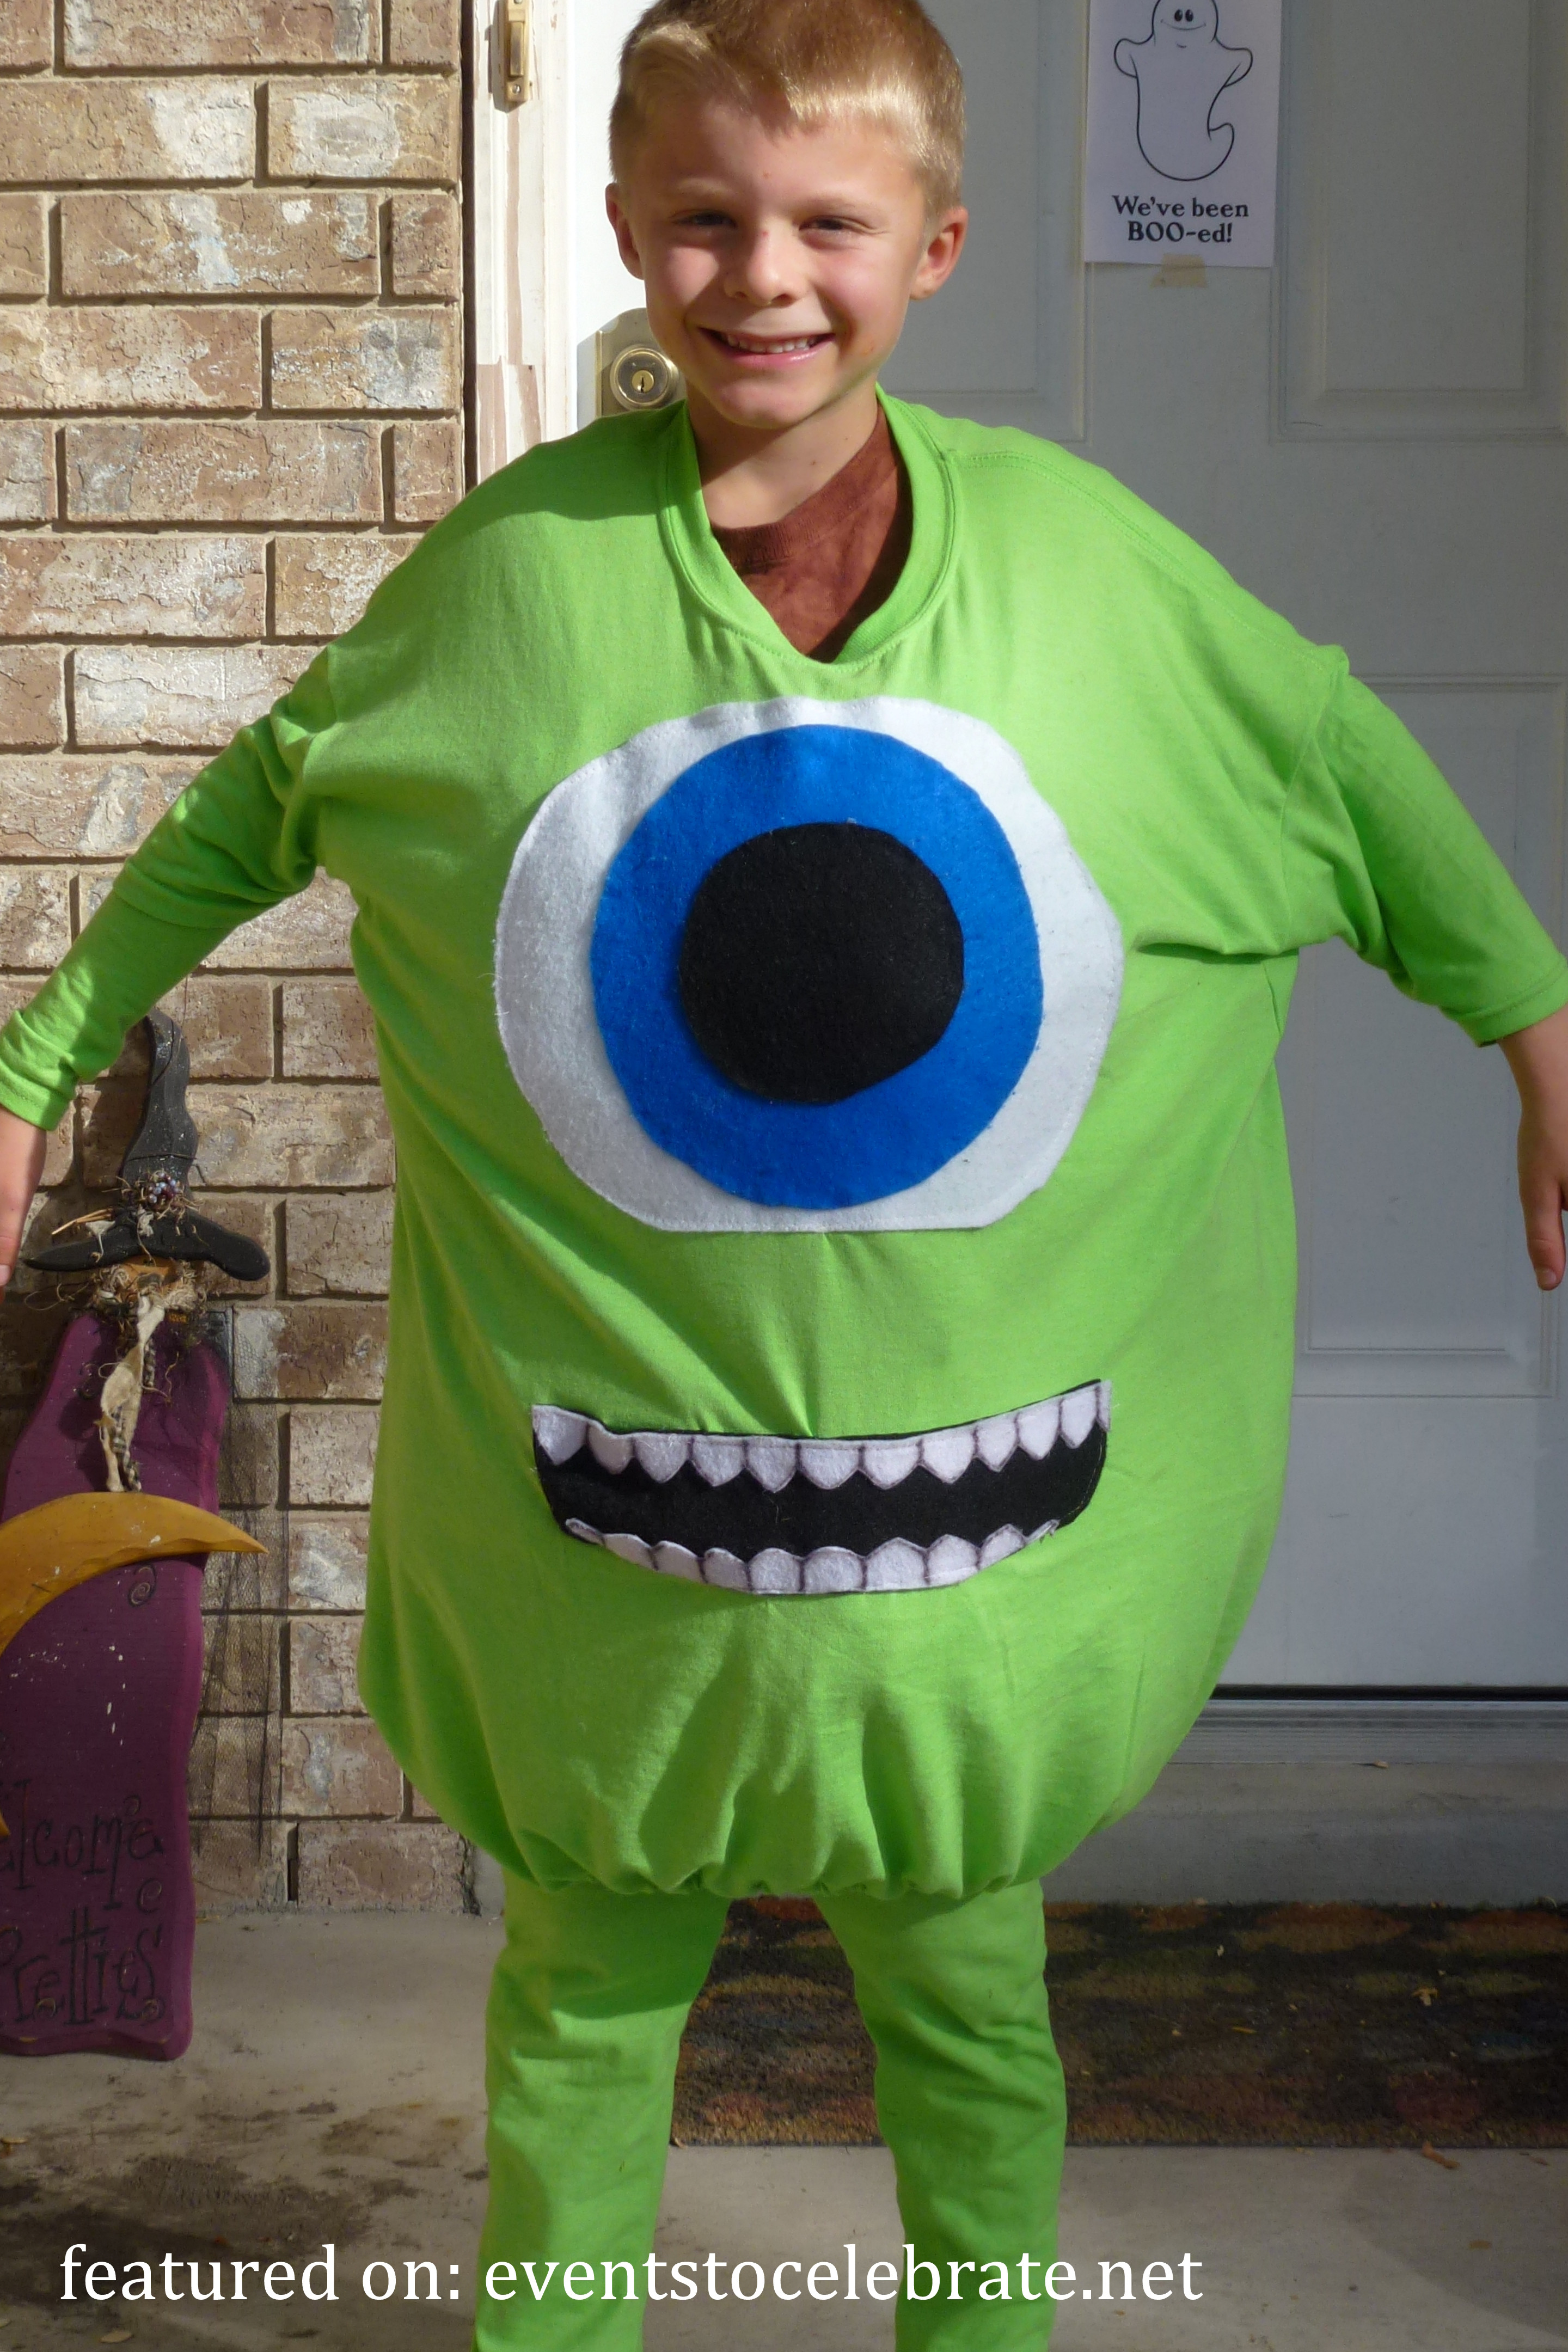 DIY Monsters Inc Costume
 DIY Halloween Costumes events to CELEBRATE